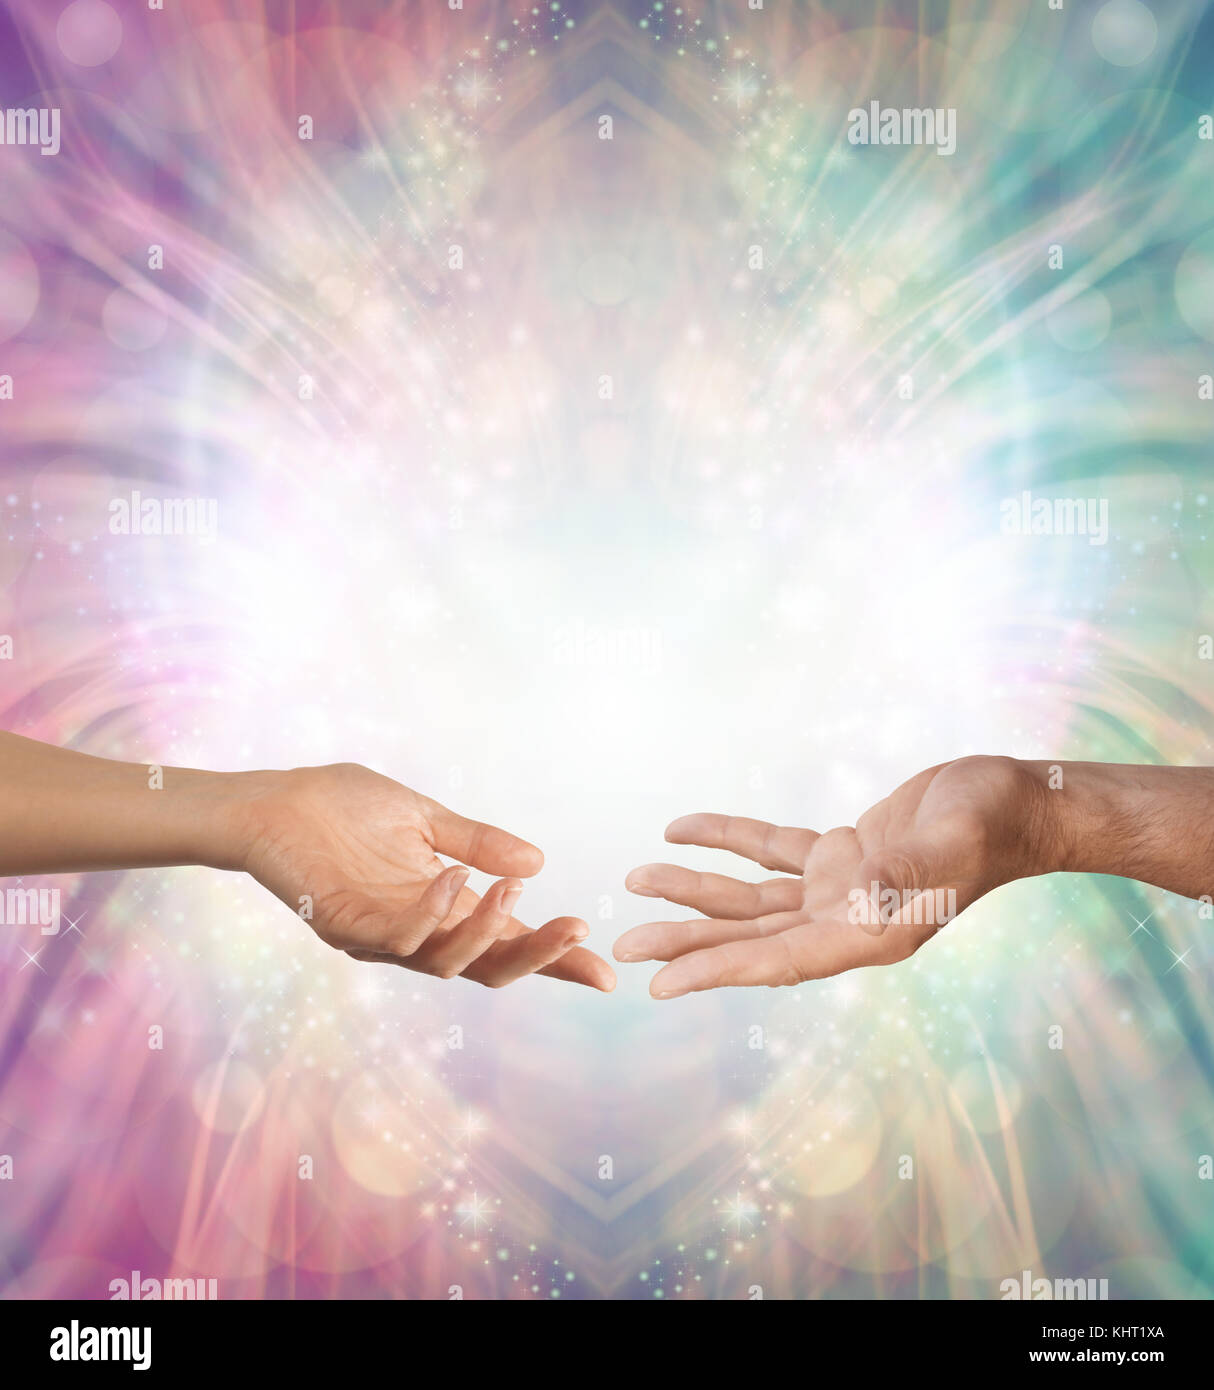 Female hand and male hand with open palms facing each other against a beautiful intricate masculine and feminine colored energy background Stock Photo